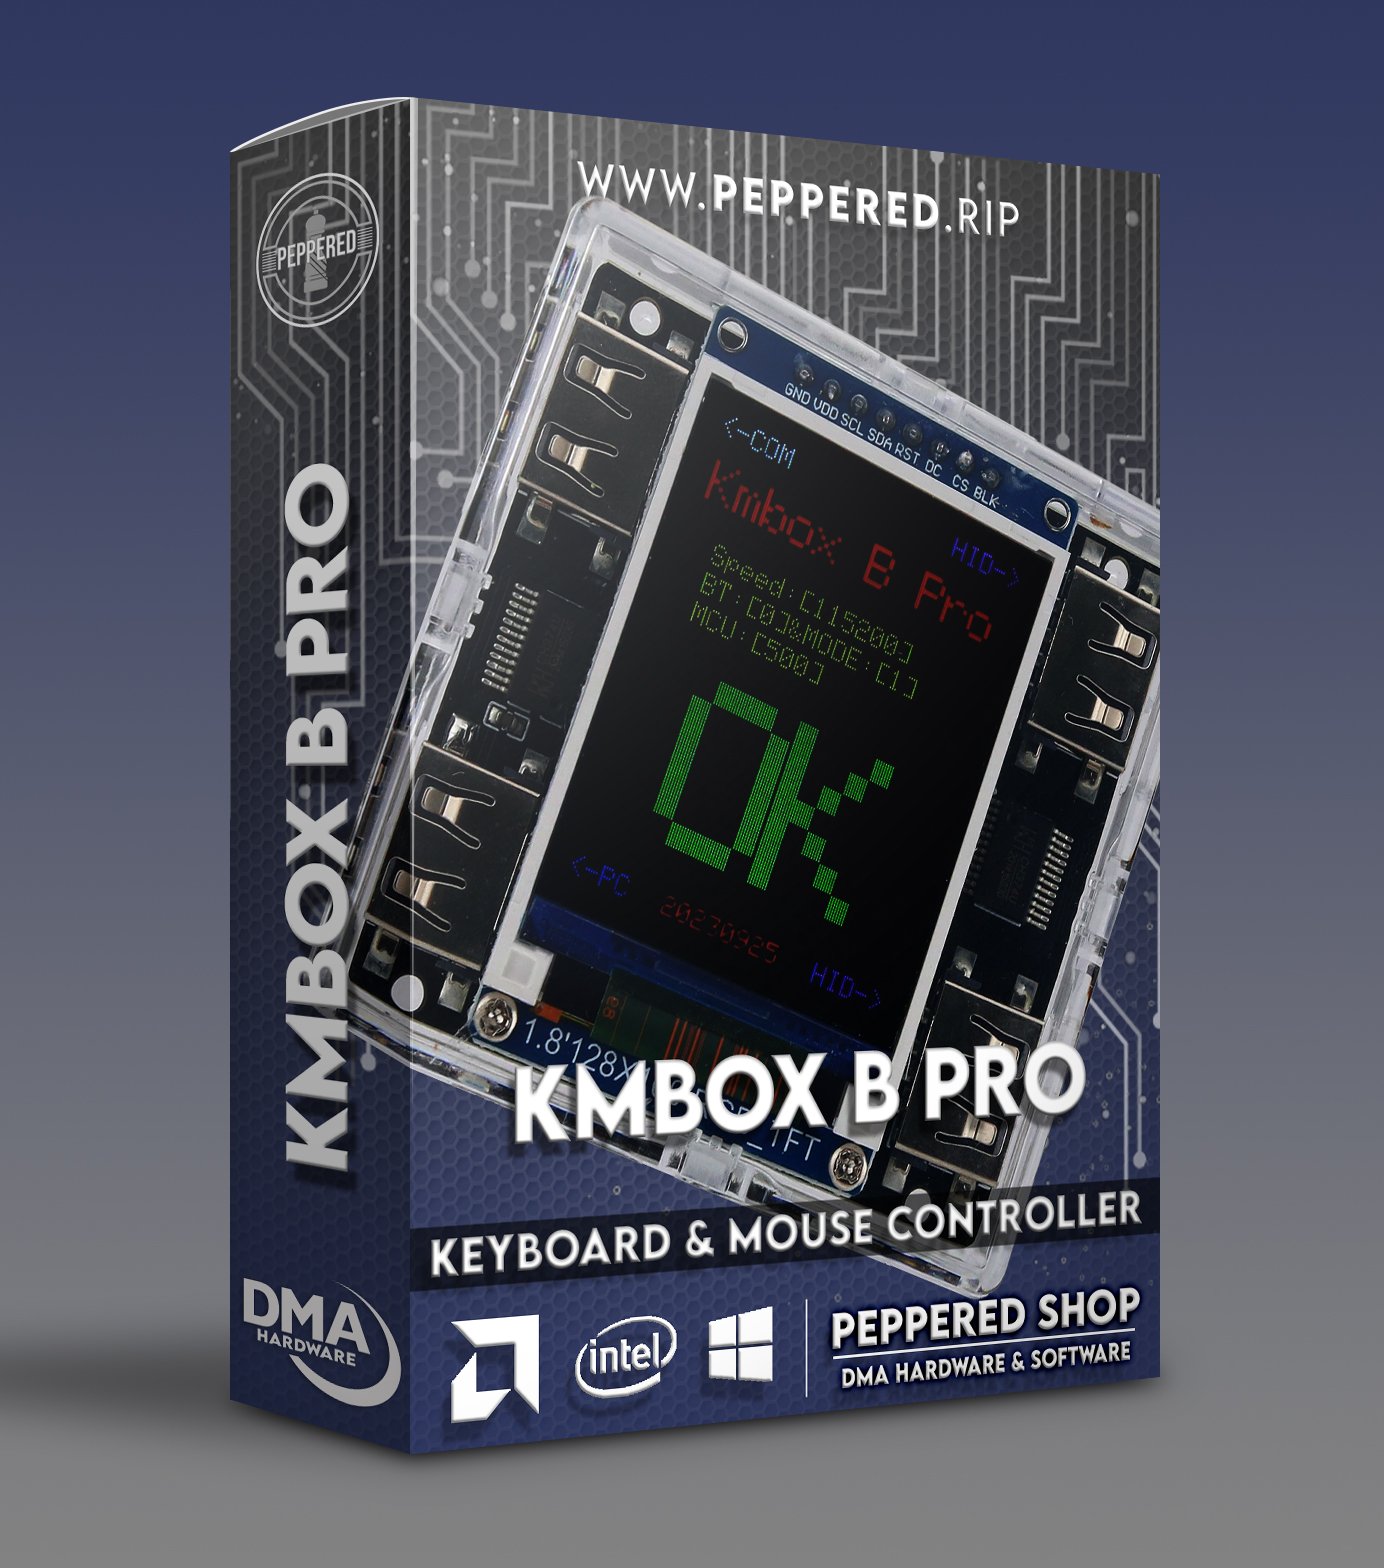 More information about "KMBOX B PRO"